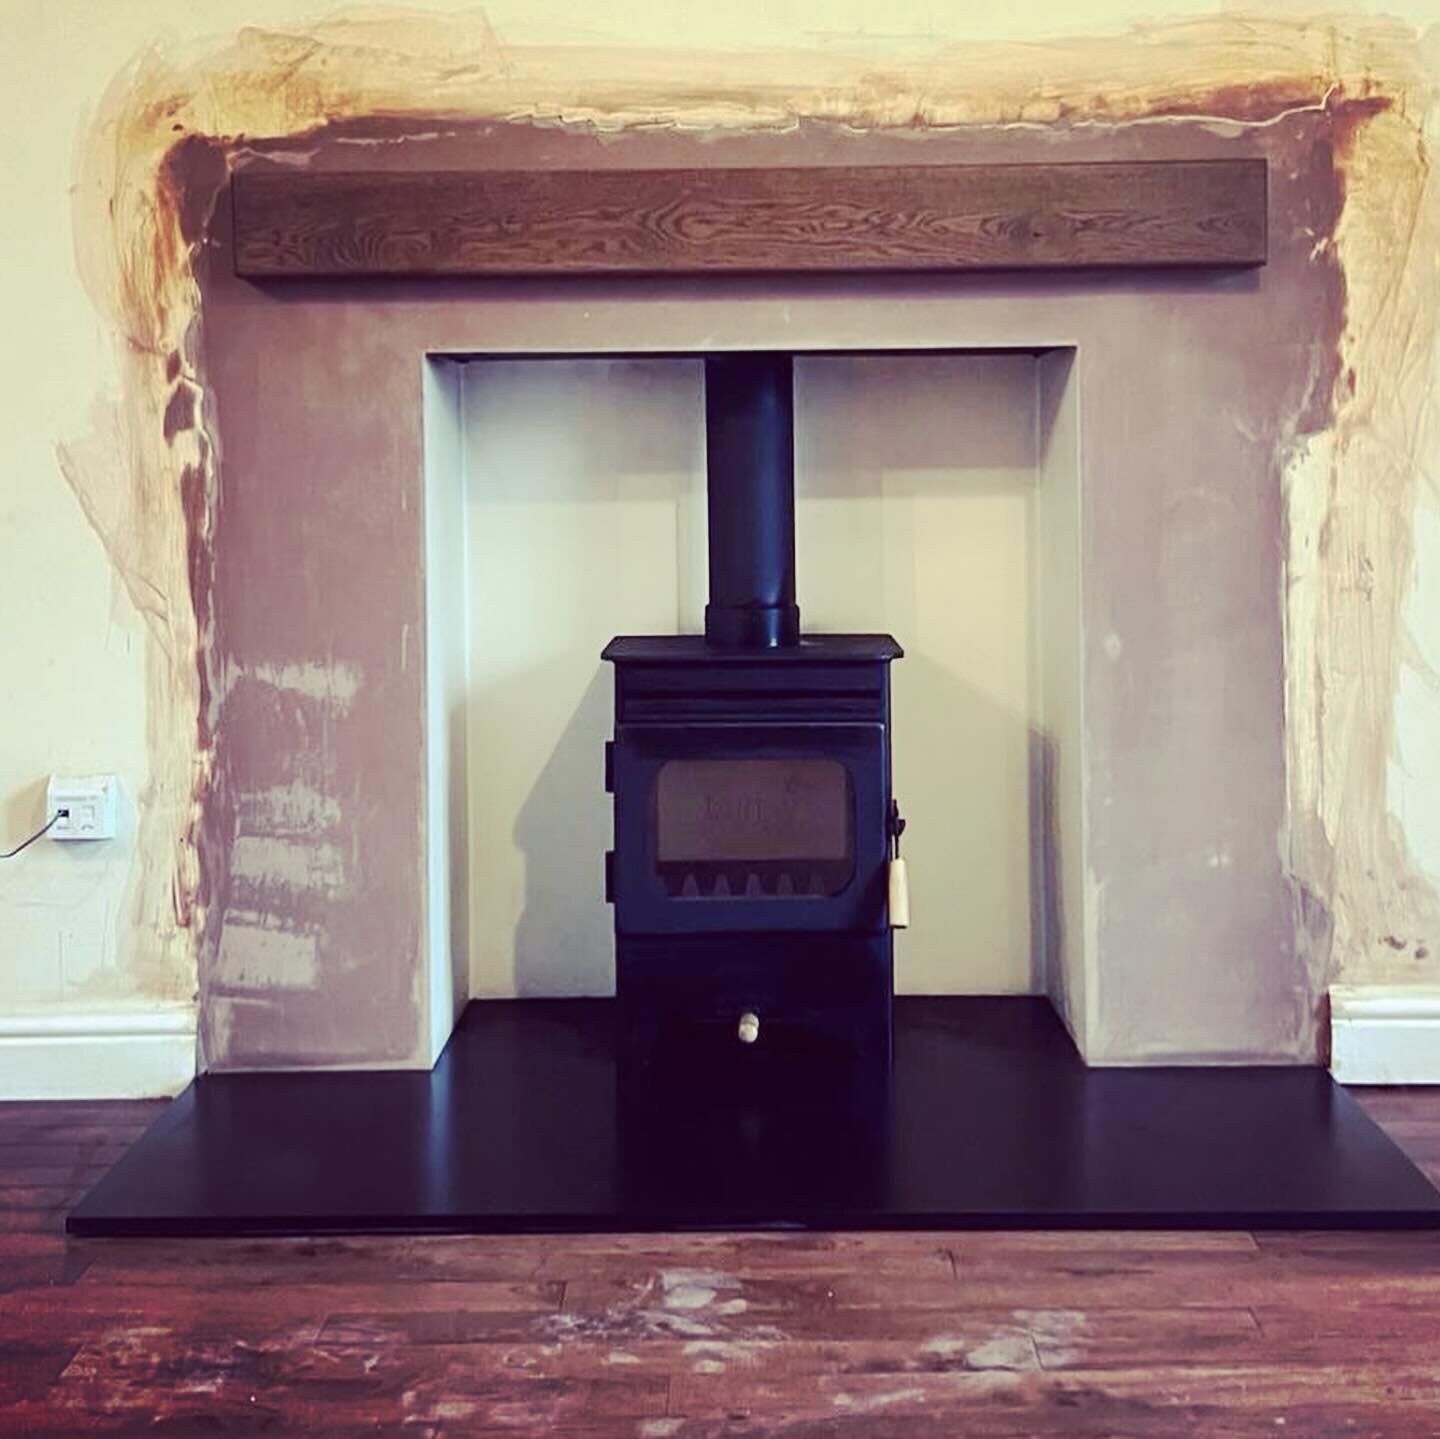 A classic and timeless design with the @burleyfires Debdale 4kw woodburning stove, a @focus_fireplaces solid dark oak beam and honed granite hearth. This is a style that will stand the test of time and stay looking - and performing- well for years to